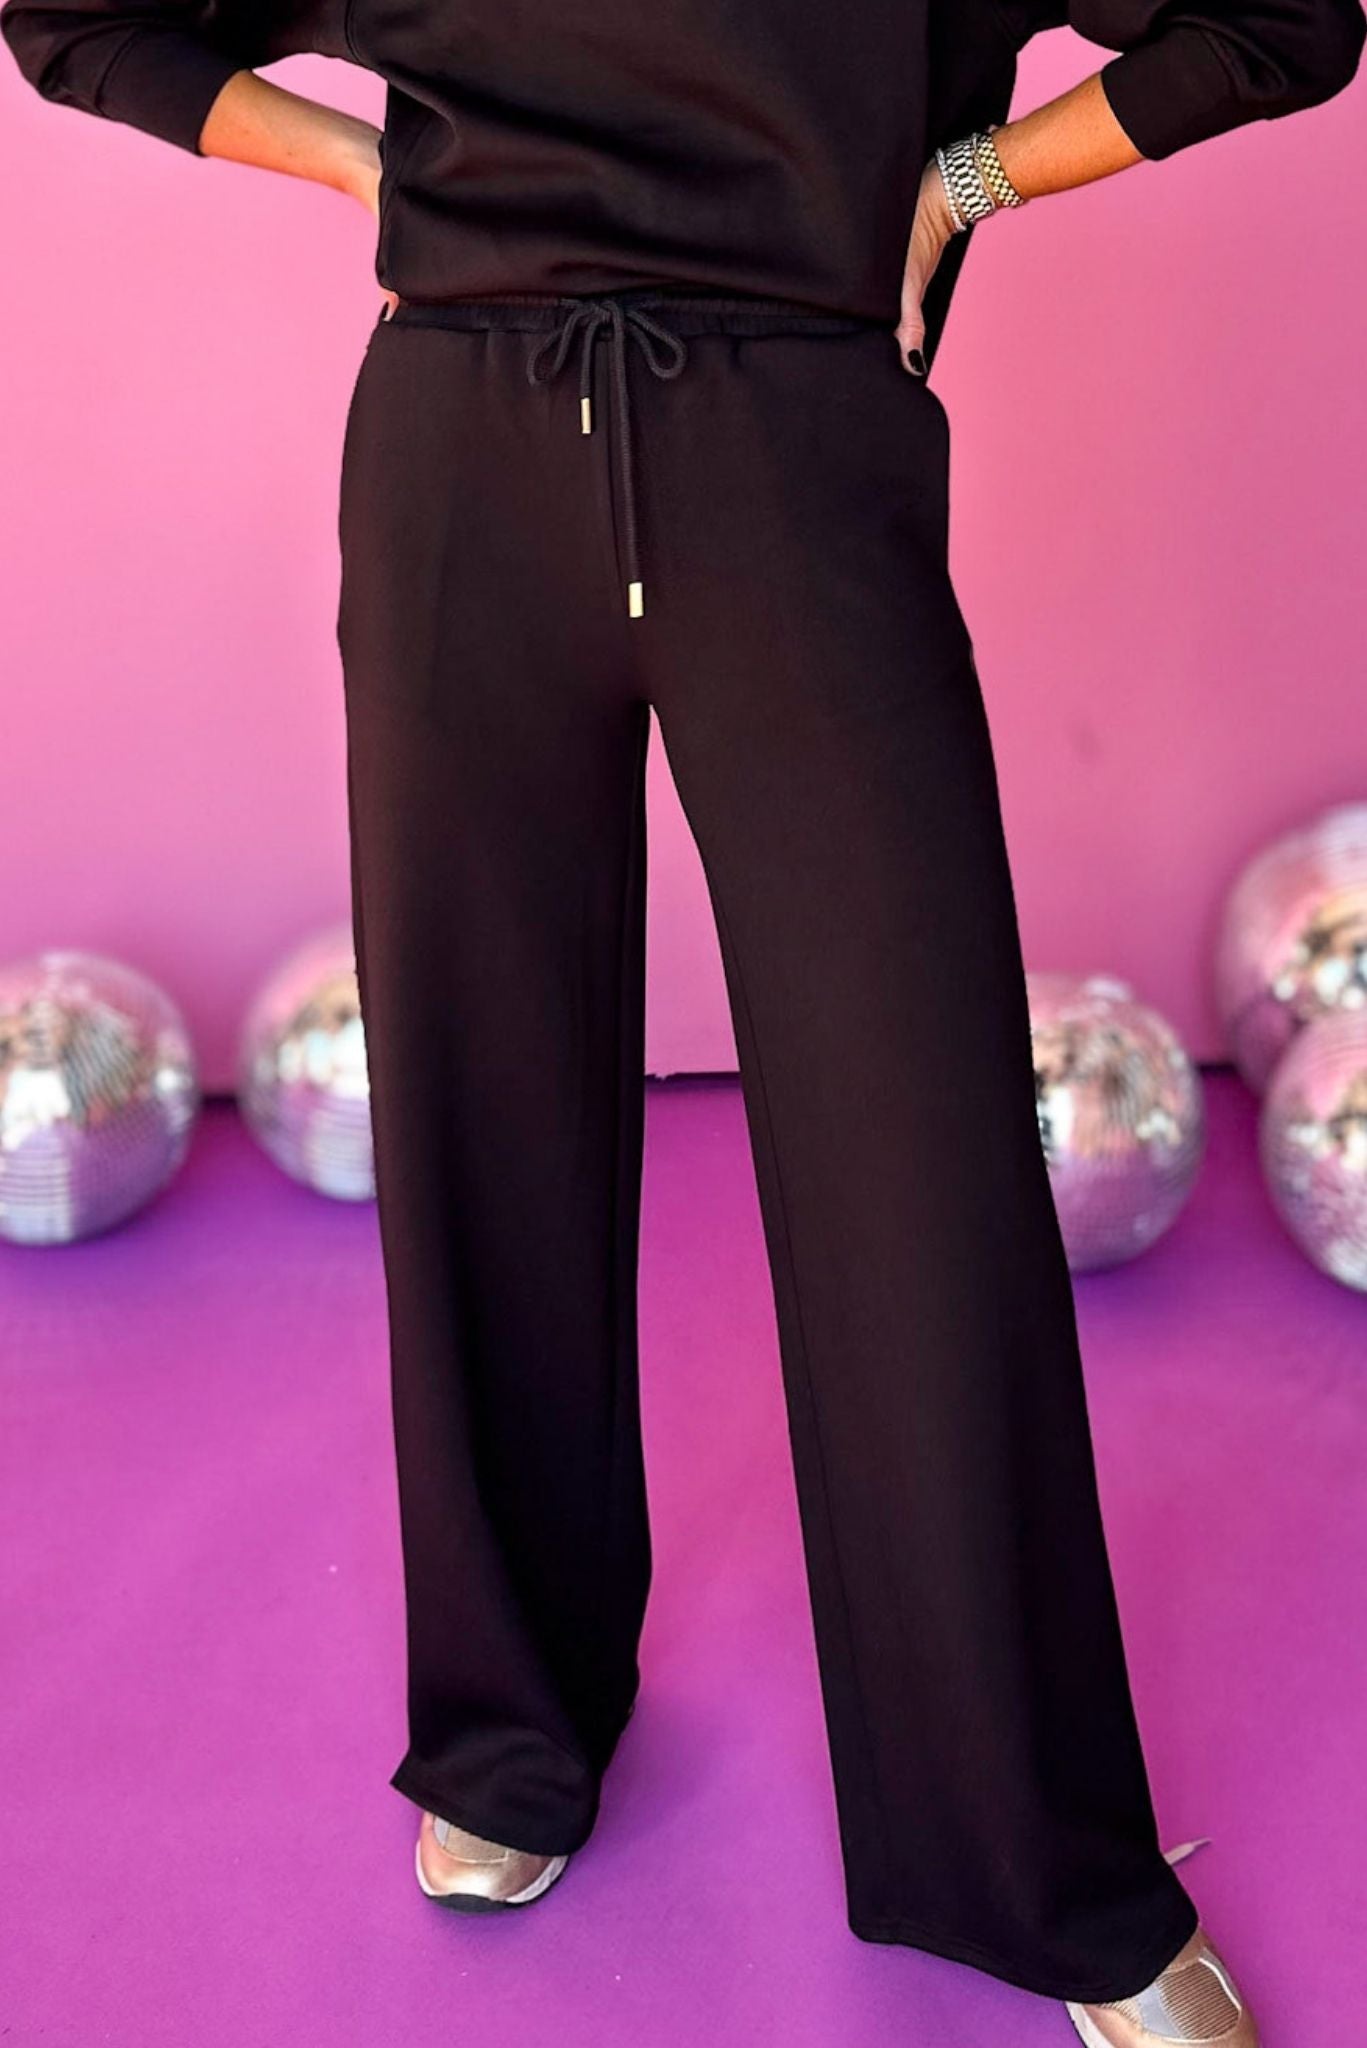 SSYS Black Air Wide Leg Pants, must have pants, must have style, must have comfortable style, fall fashion, fall style, street style, mom style, elevated comfortable, elevated loungewear, elevated style, shop style your senses by mallory fitzsimmons